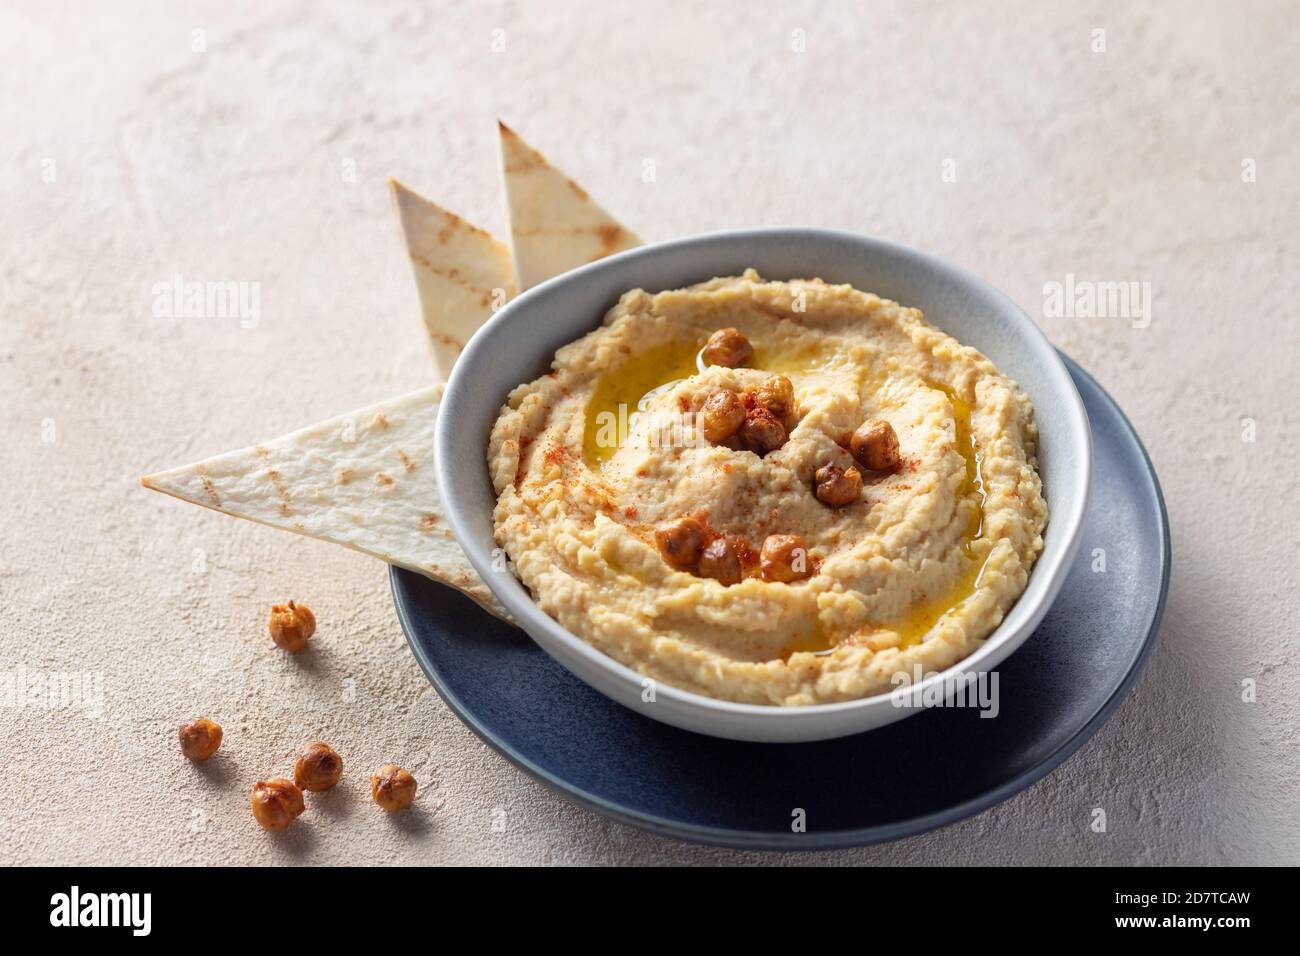 close-up of bowl of homemade hummus with roasted chickpeas, olive oil and spices. Stock Photo